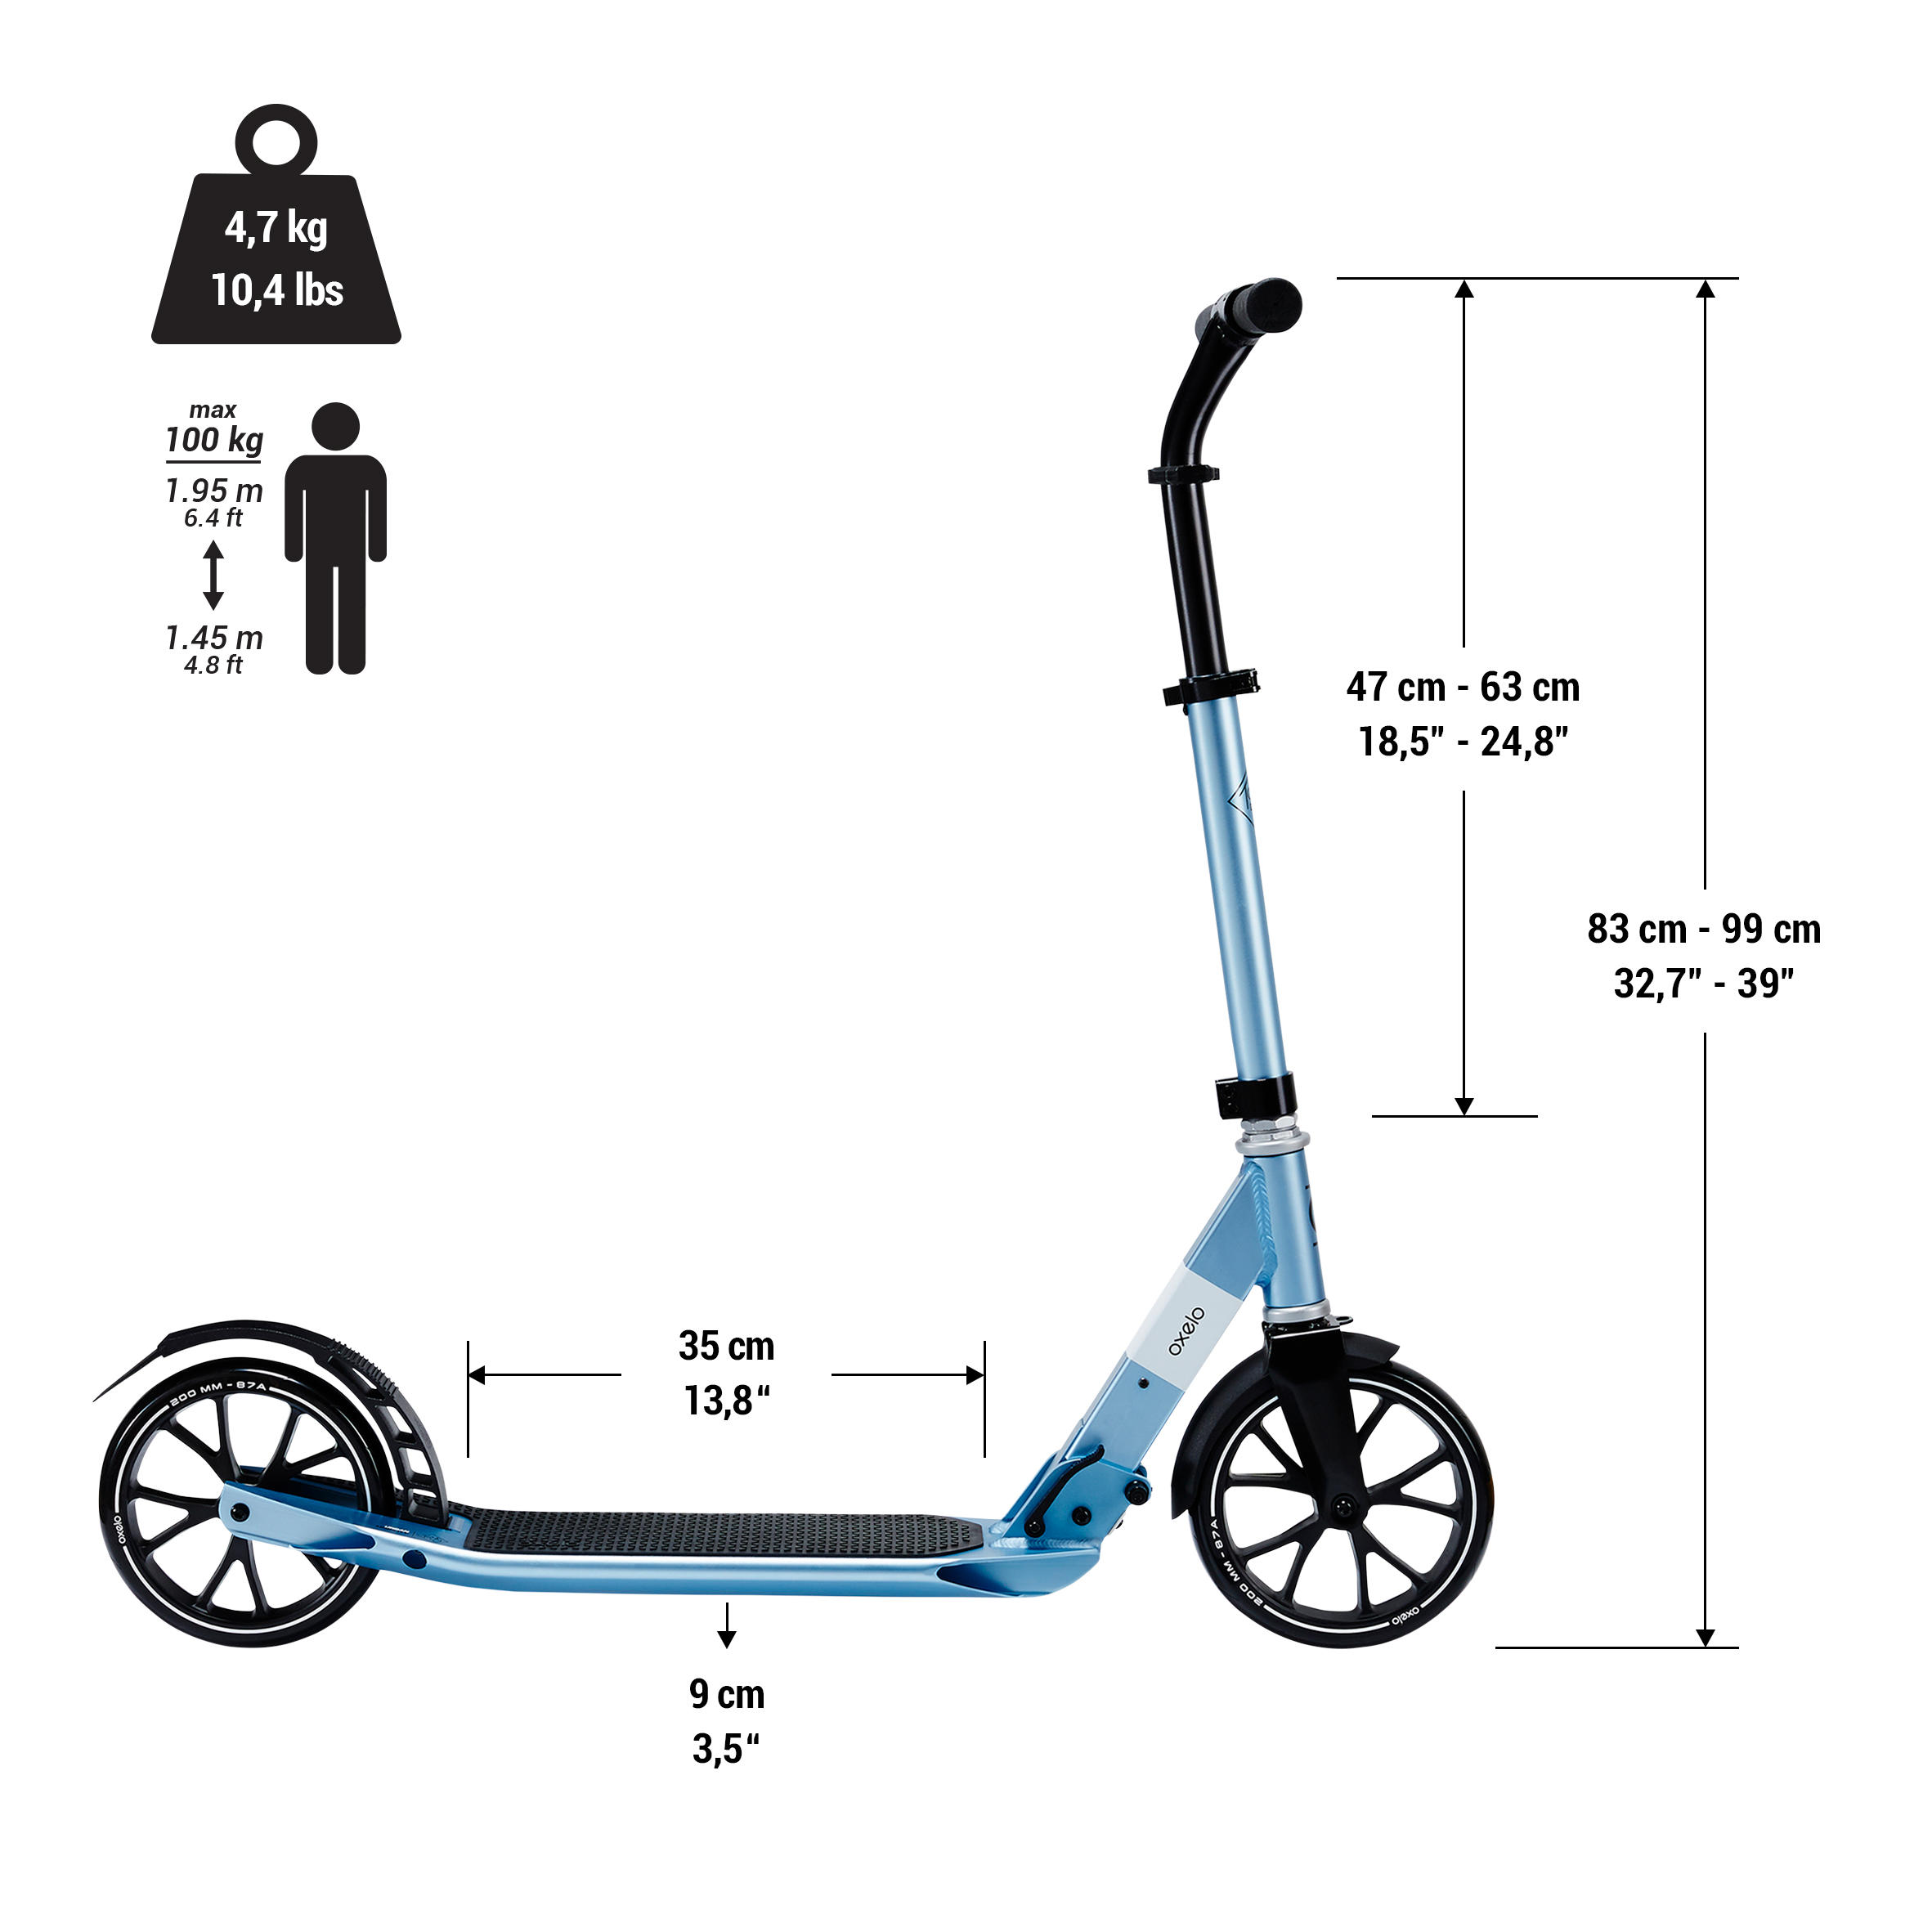 scooter town 5 xl